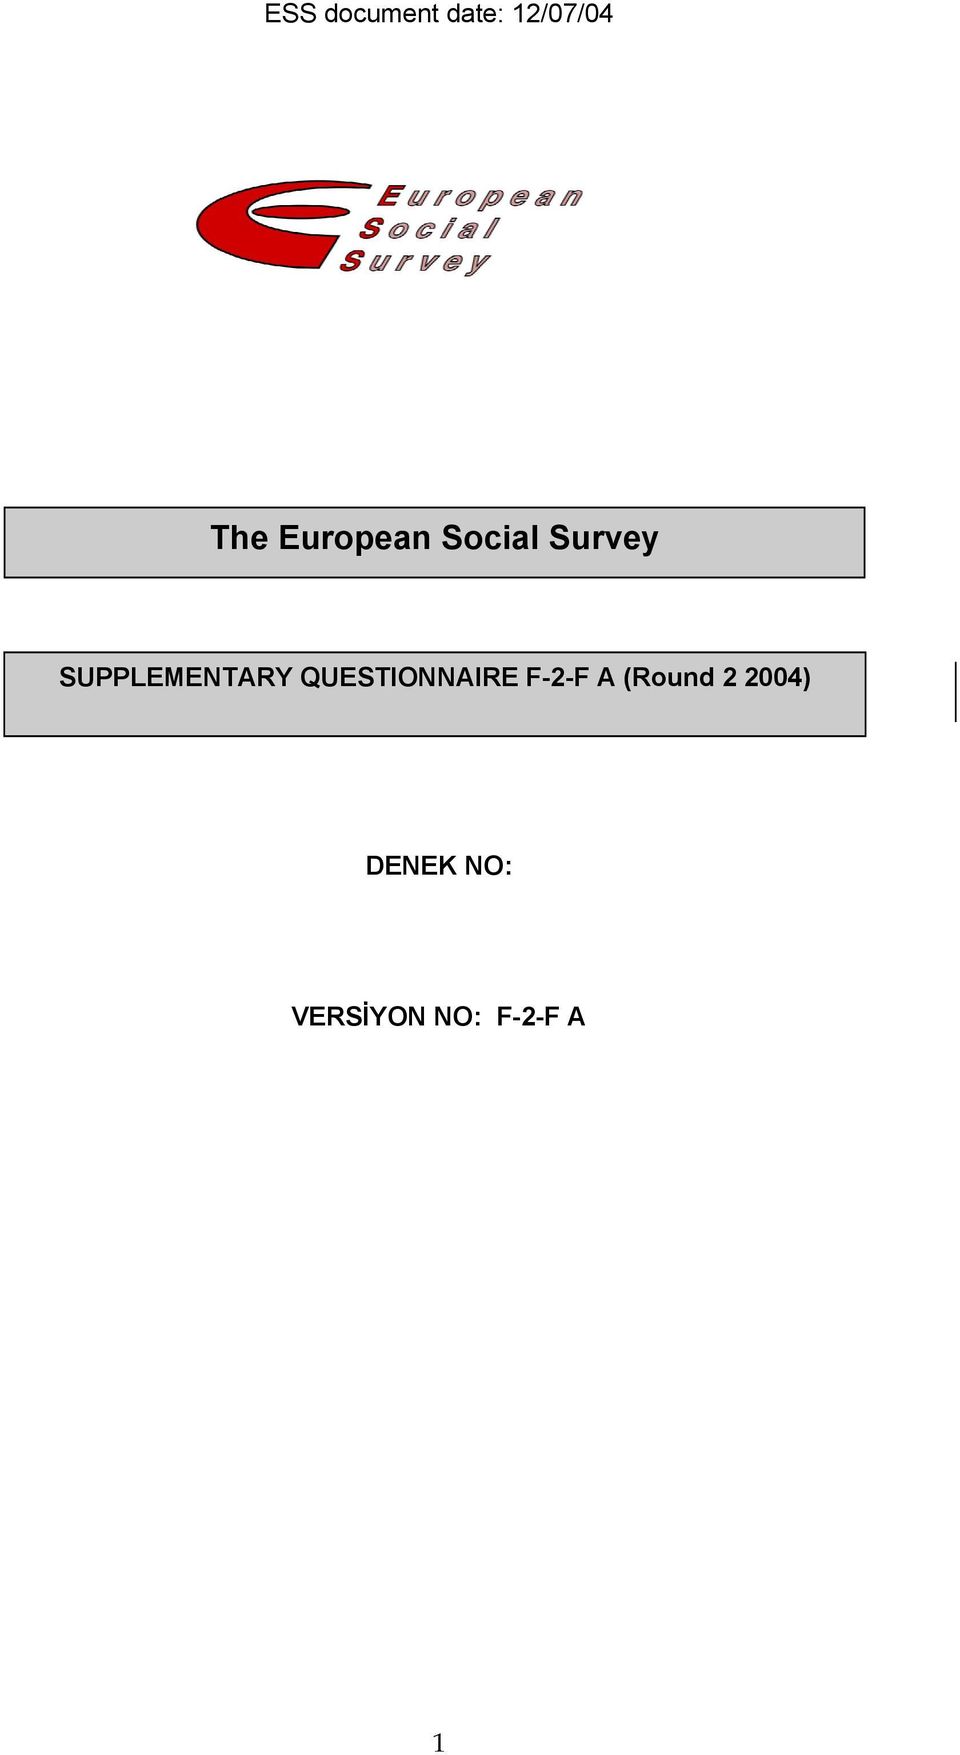 SUPPLEMENTARY QUESTIONNAIRE F-2-F